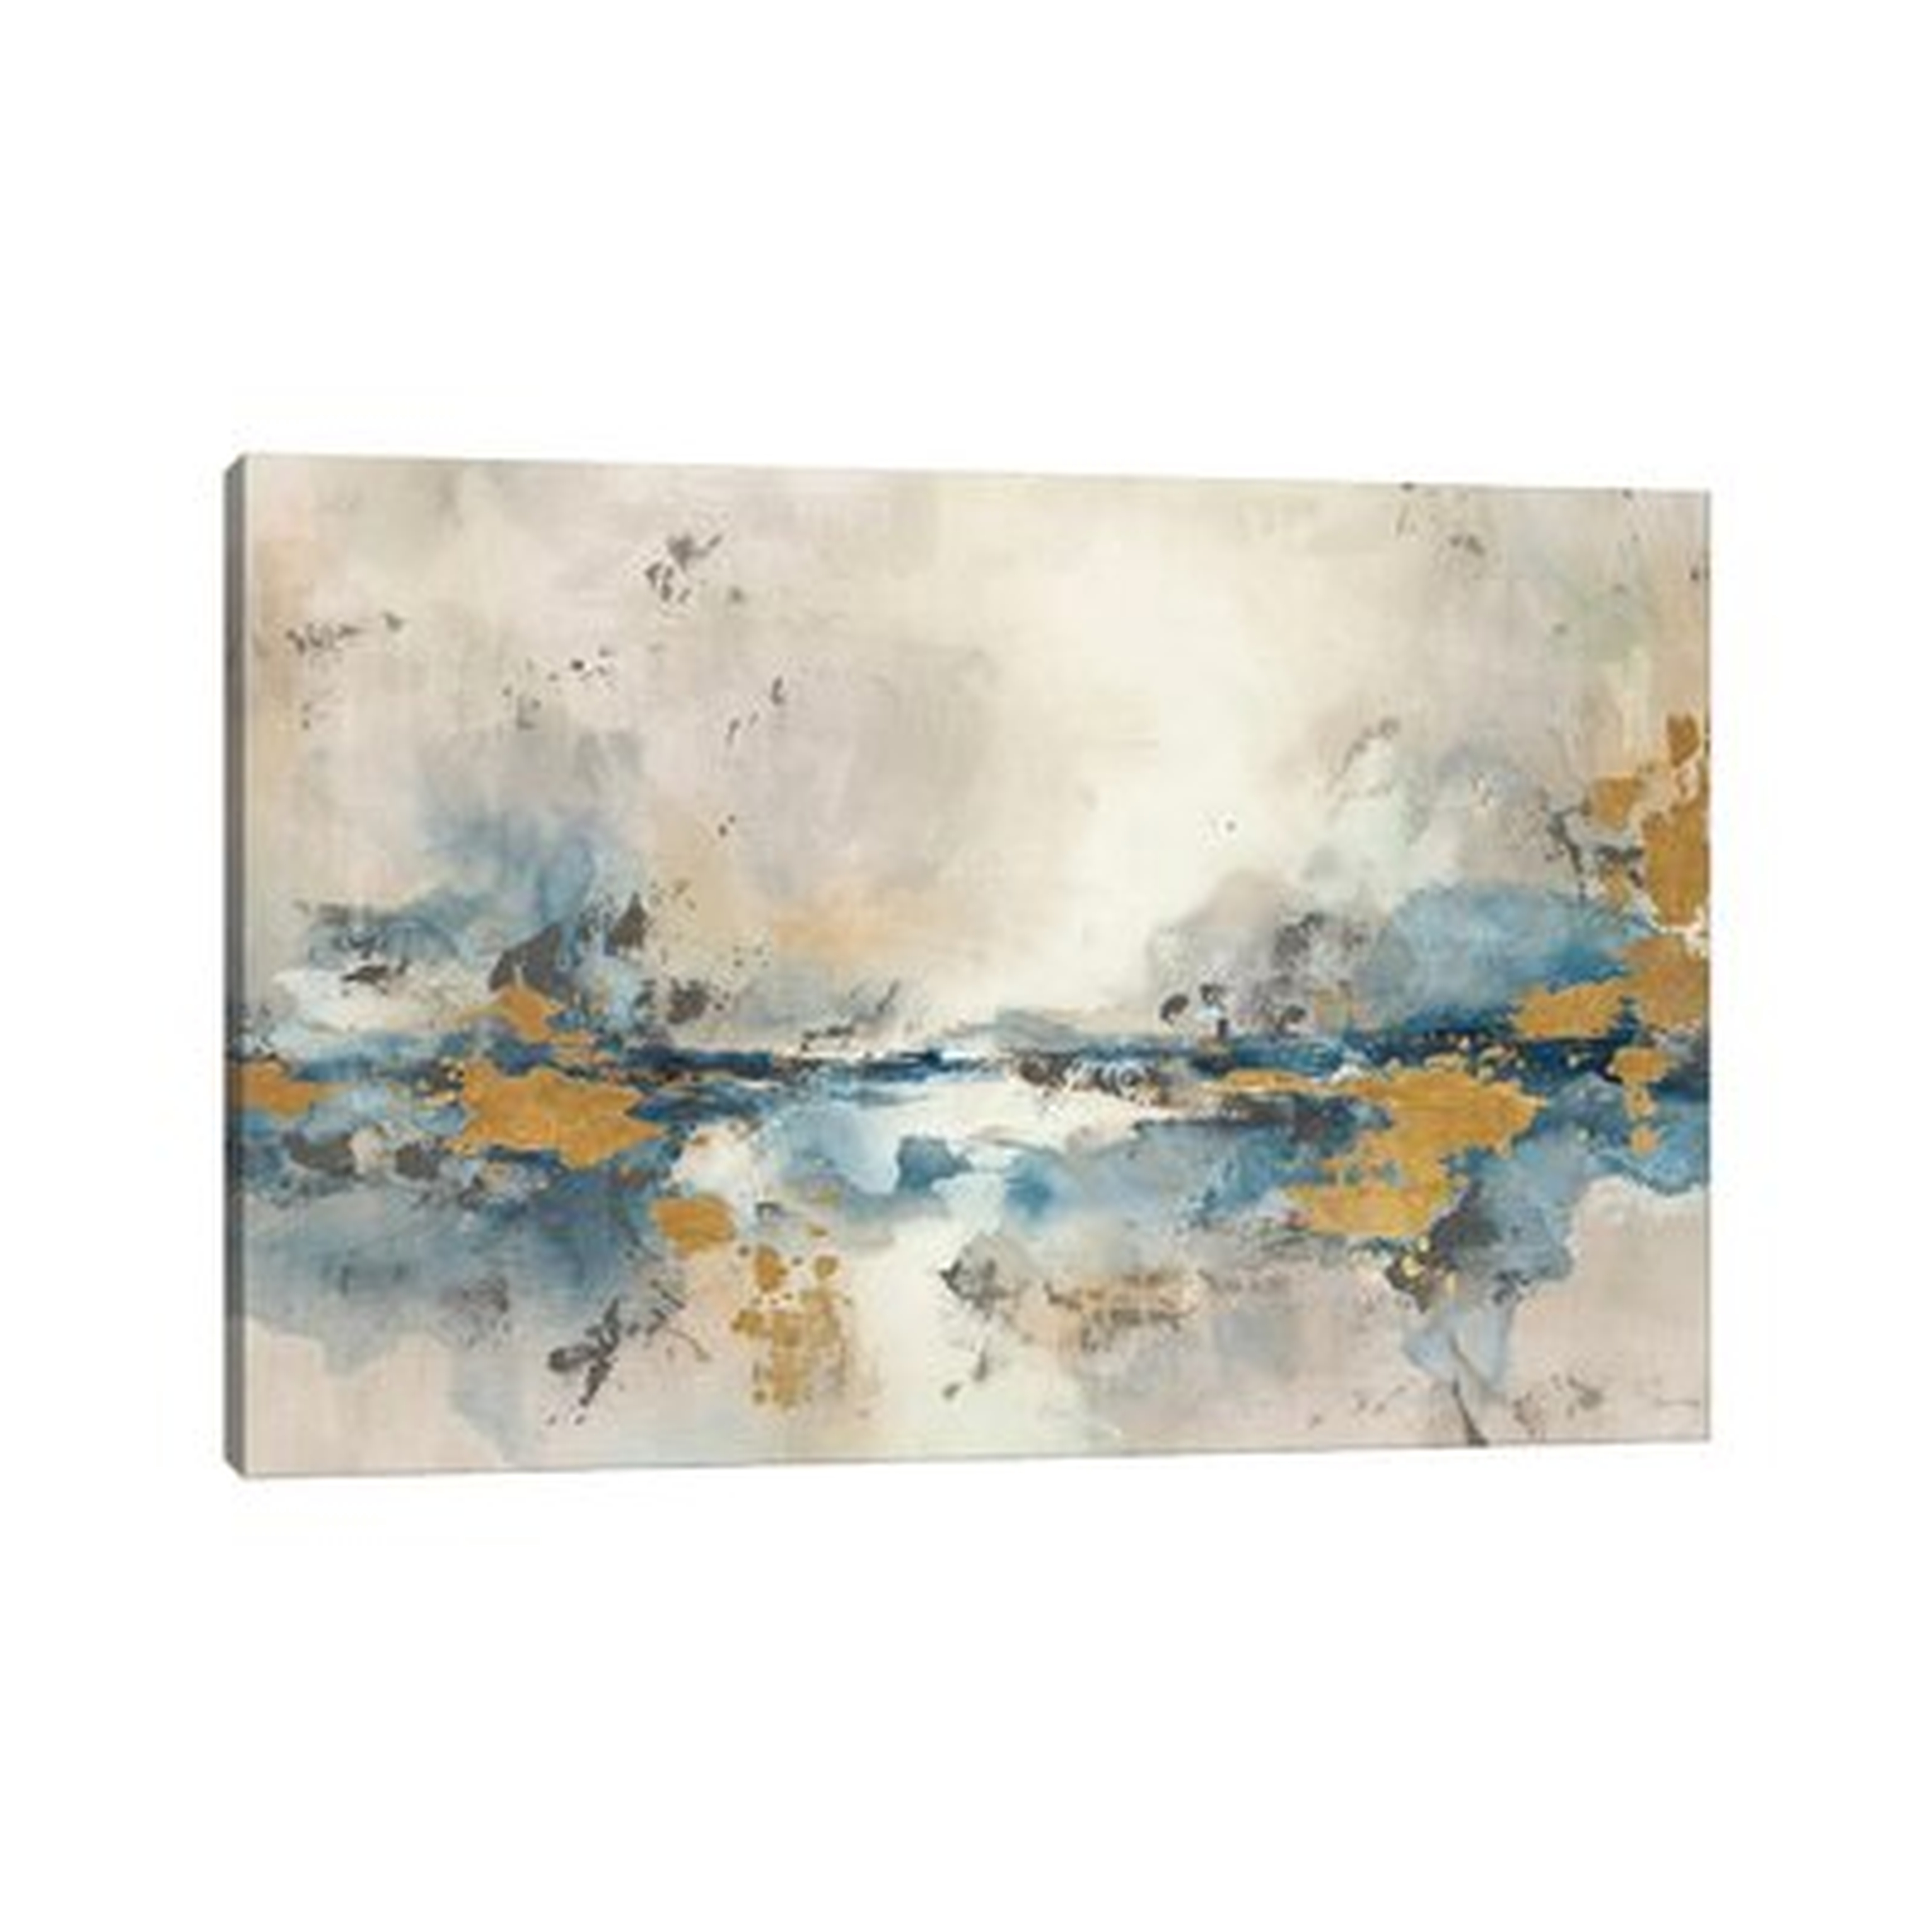 Early Light by Leah Rei - Wrapped Canvas Painting Print - Wayfair